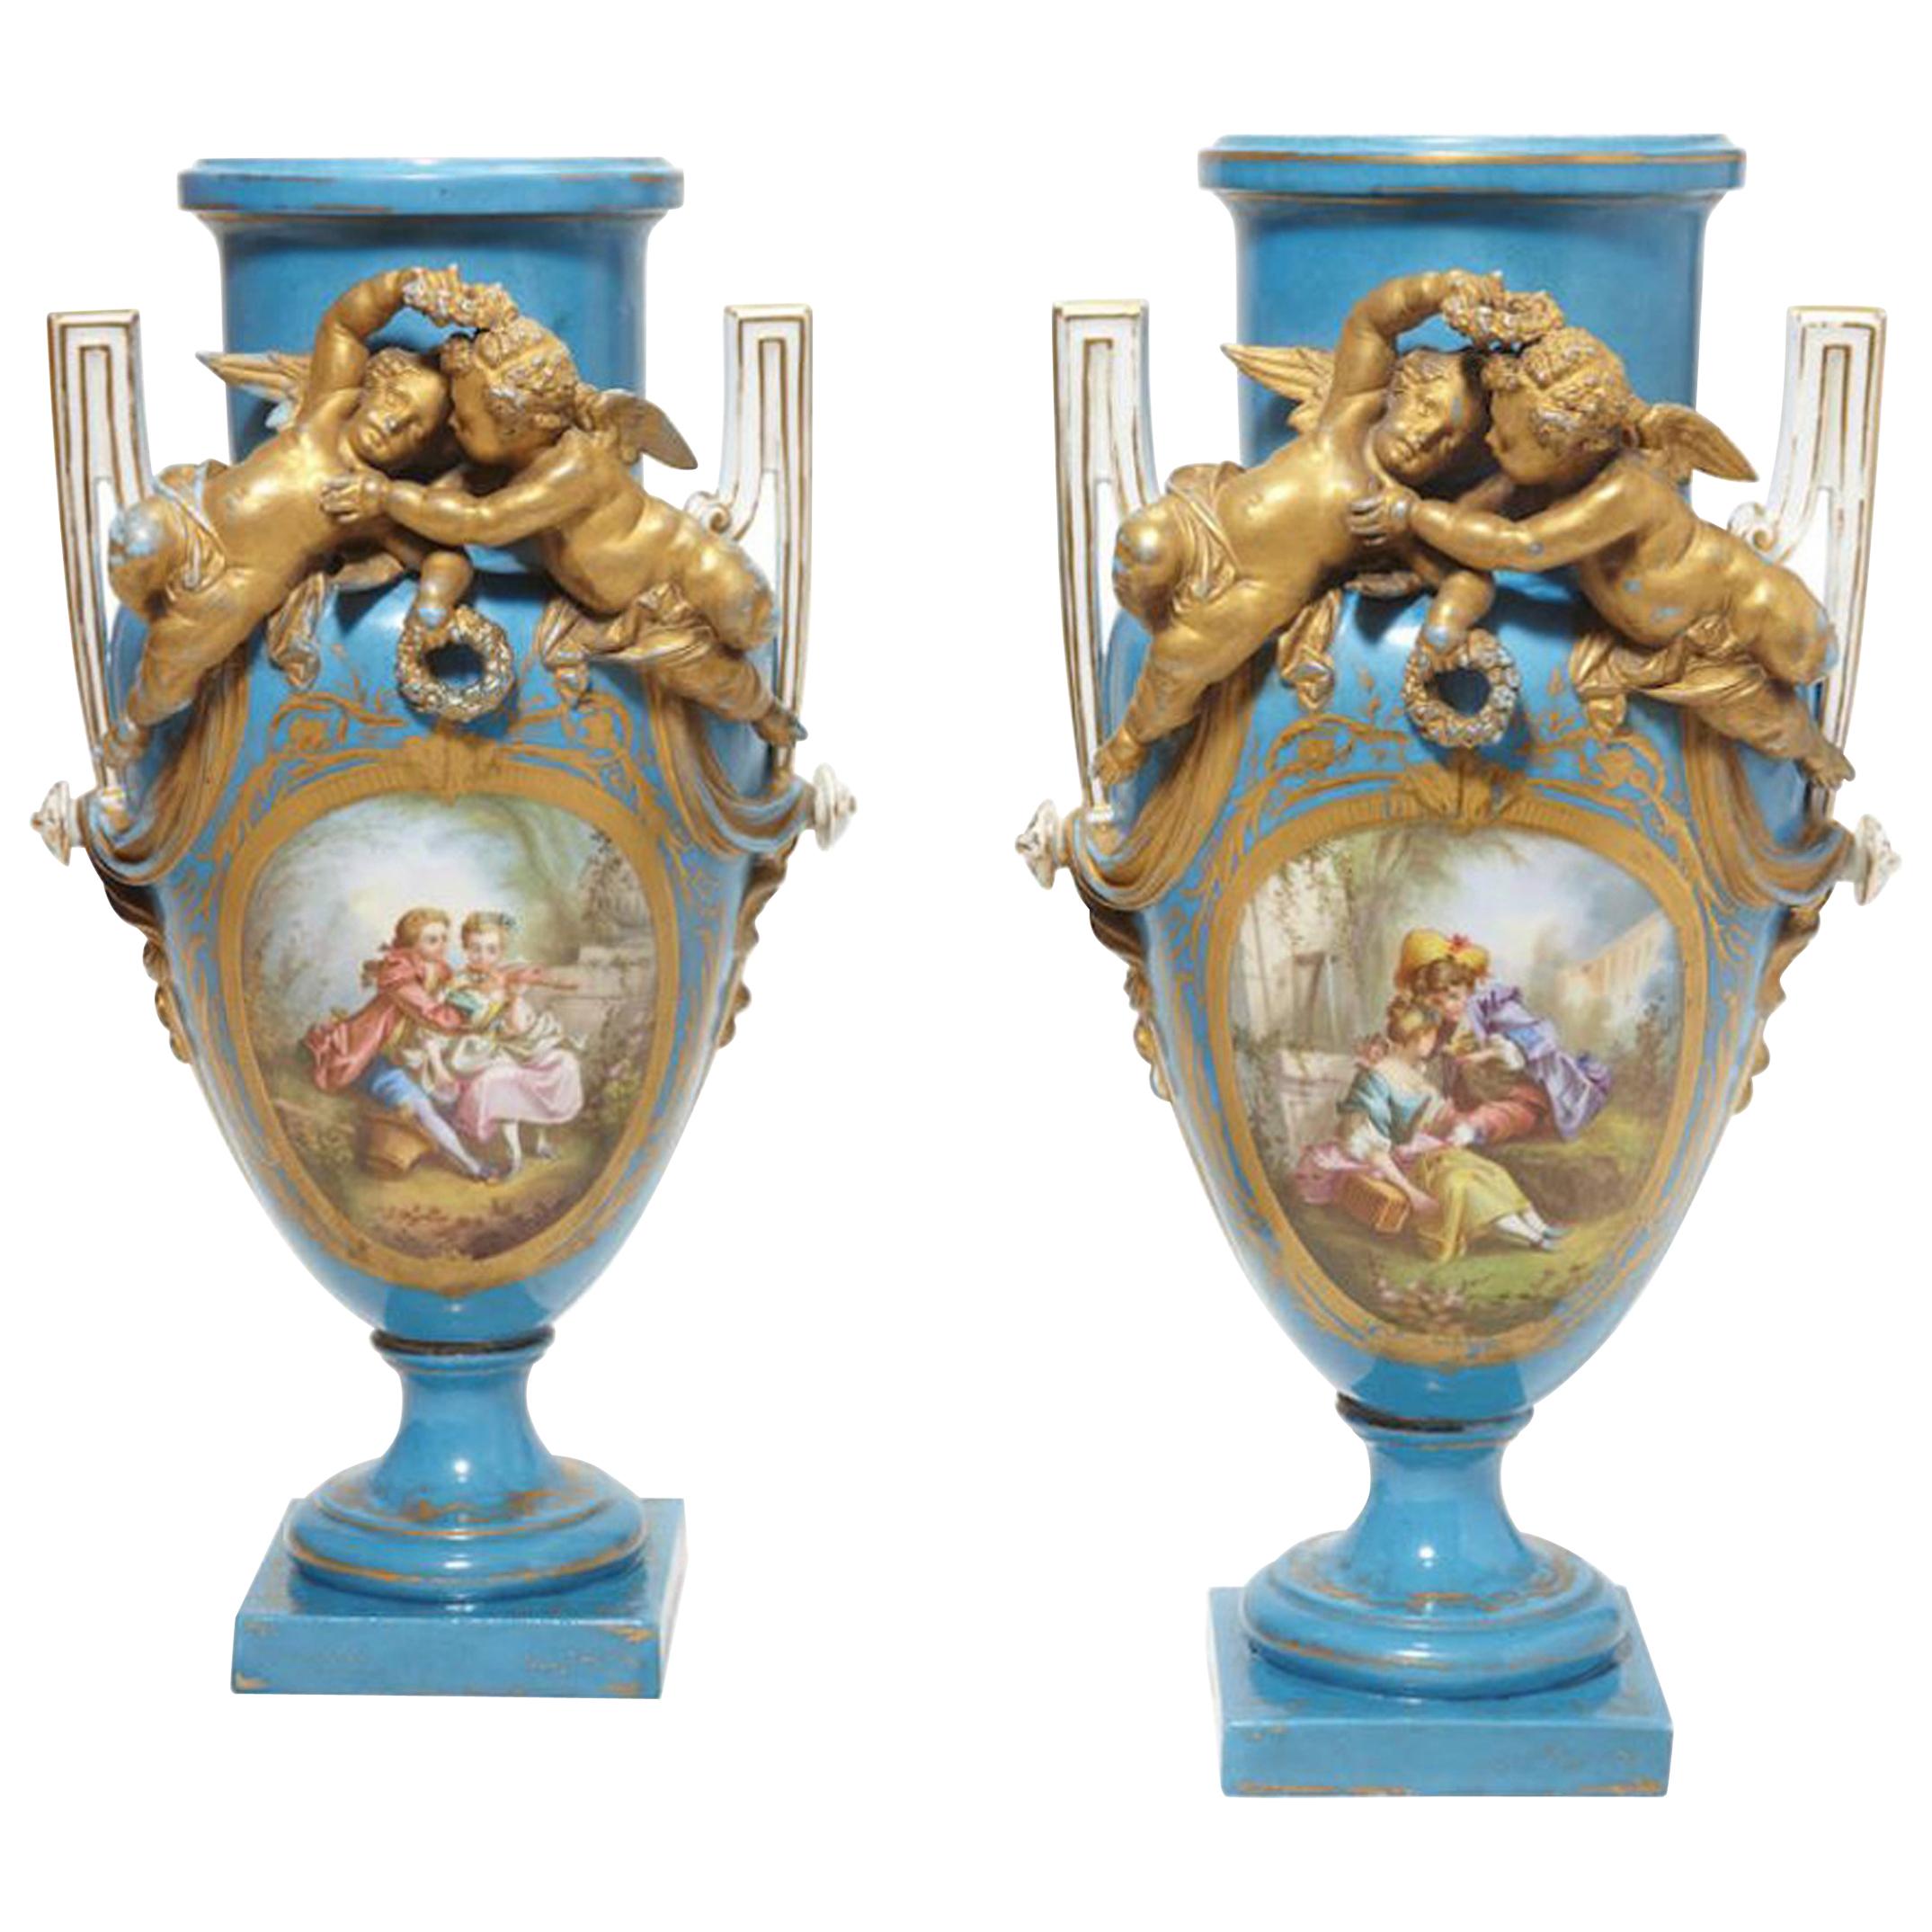 Pair of French Sèvres Style Porcelain Vases, 19th Century